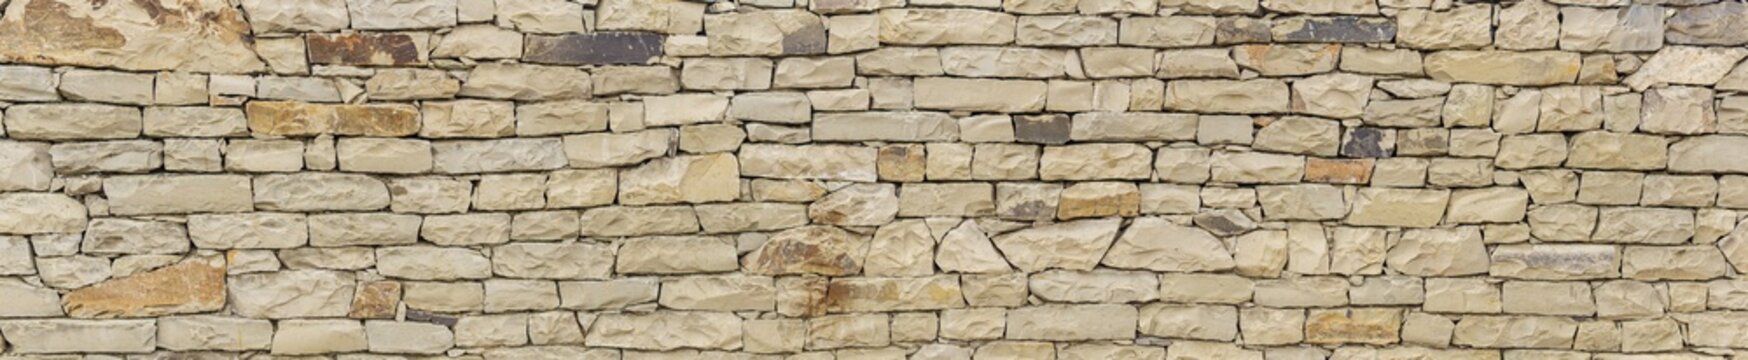 horizontal background, texture - wall of roughly hewn natural light stone